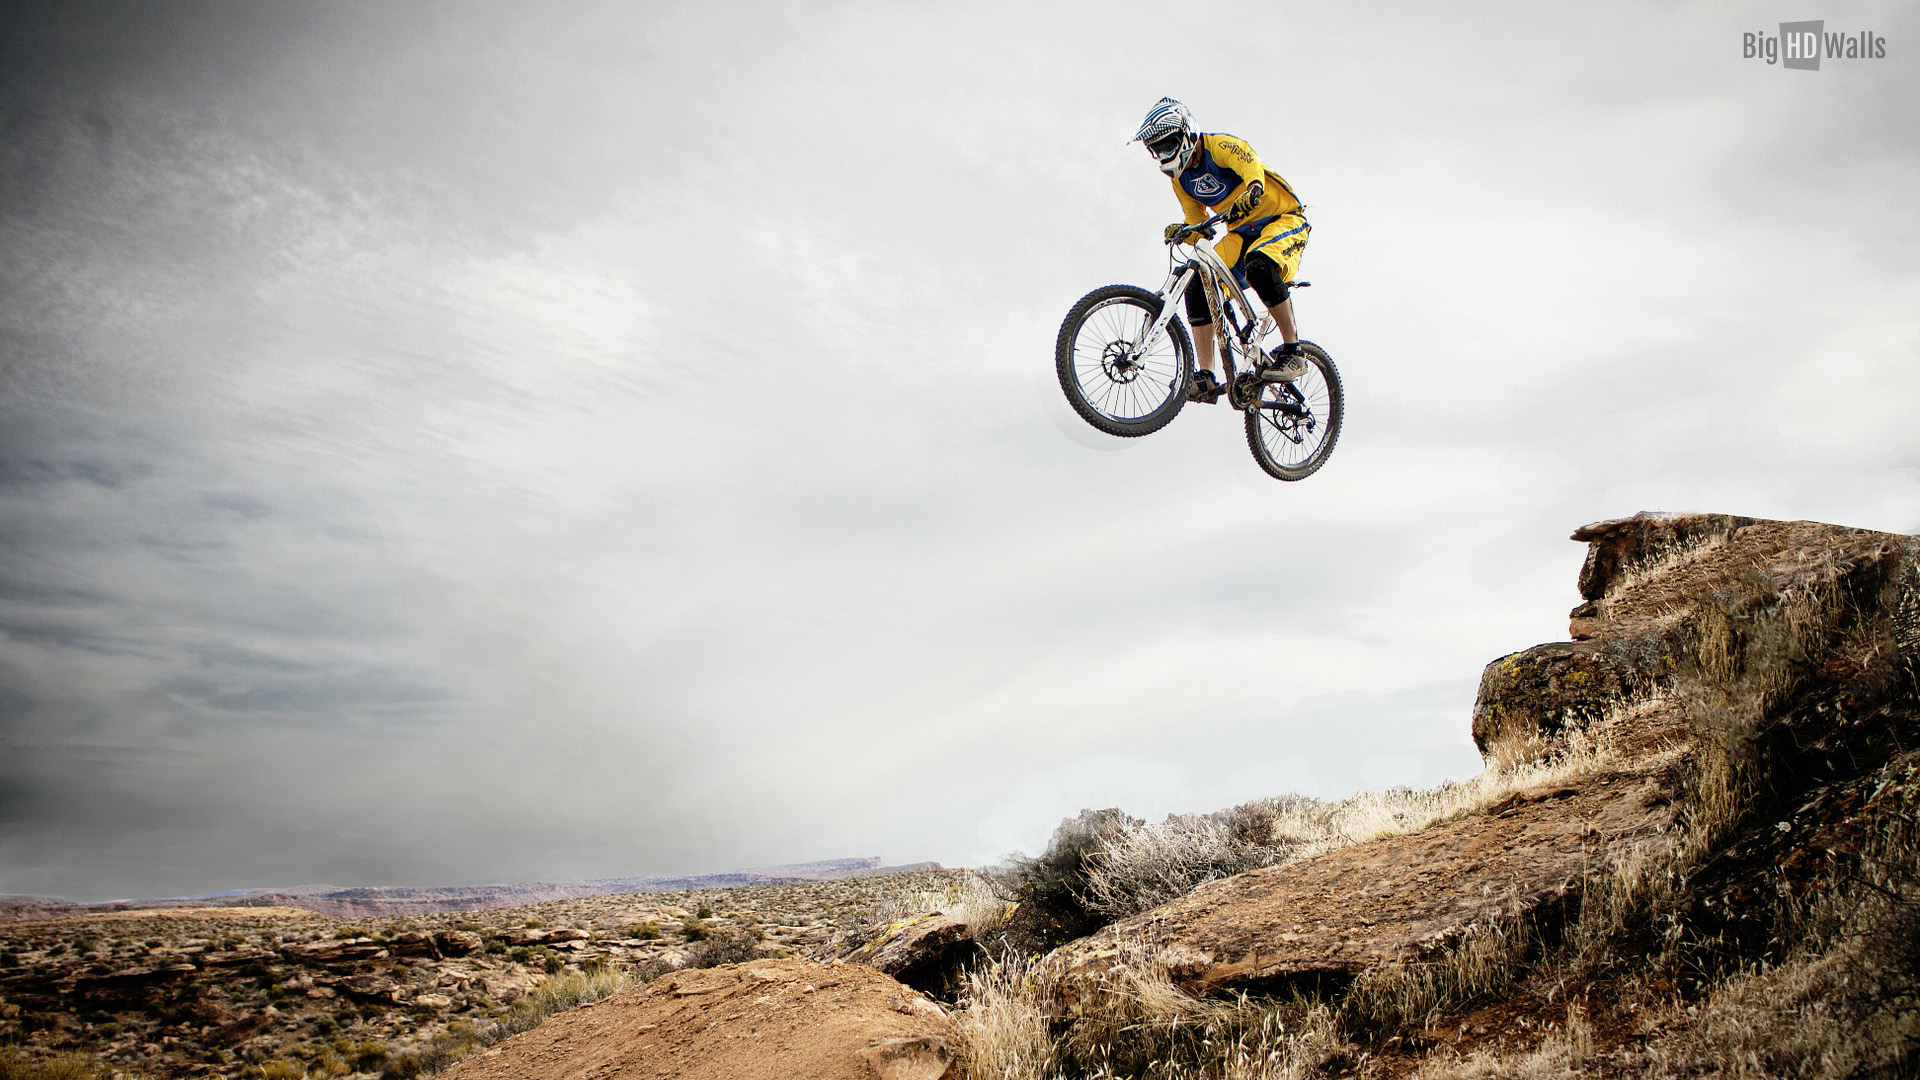 Awesome Picture Of A Bike In Air During Downhill Mountain Biking